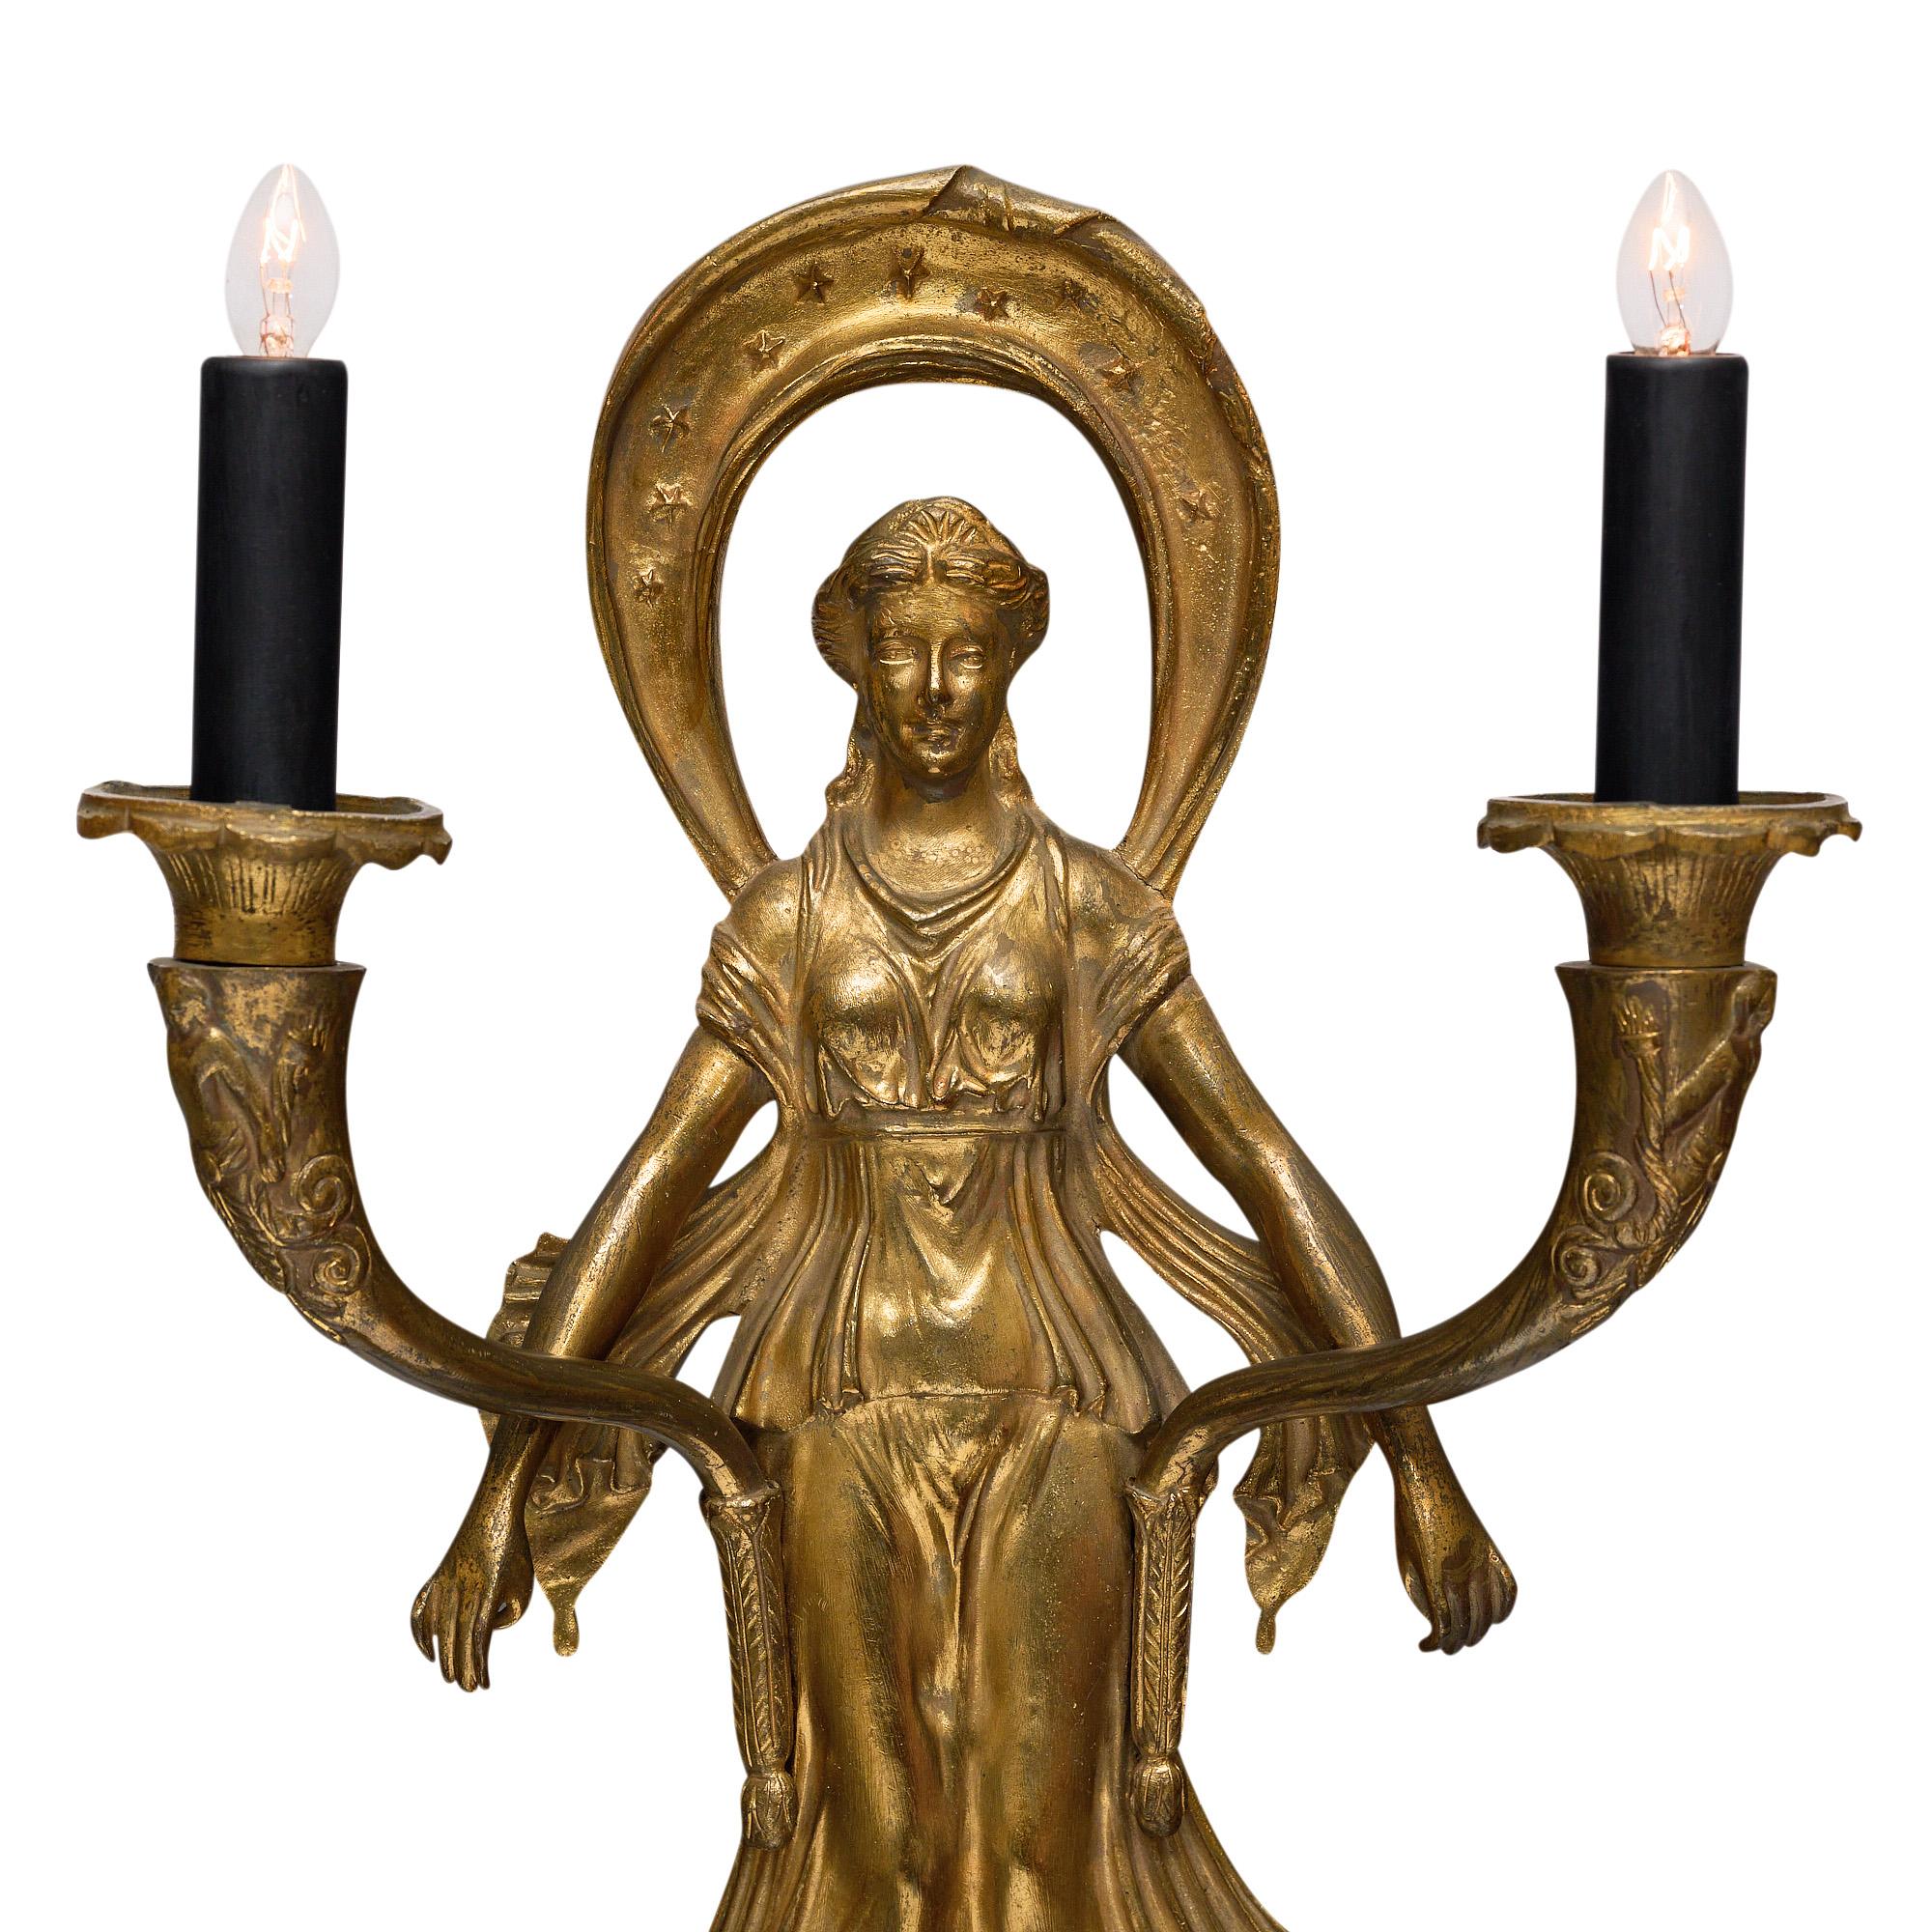 Sconces from France in the French Empire style in the manner of Pierre-Philippe Thomire. The pair is made of finely cast gilded bronze and features a female figure as an antique Greek Cariatide holding a pair of “Flambeaux” (torches). We loved the